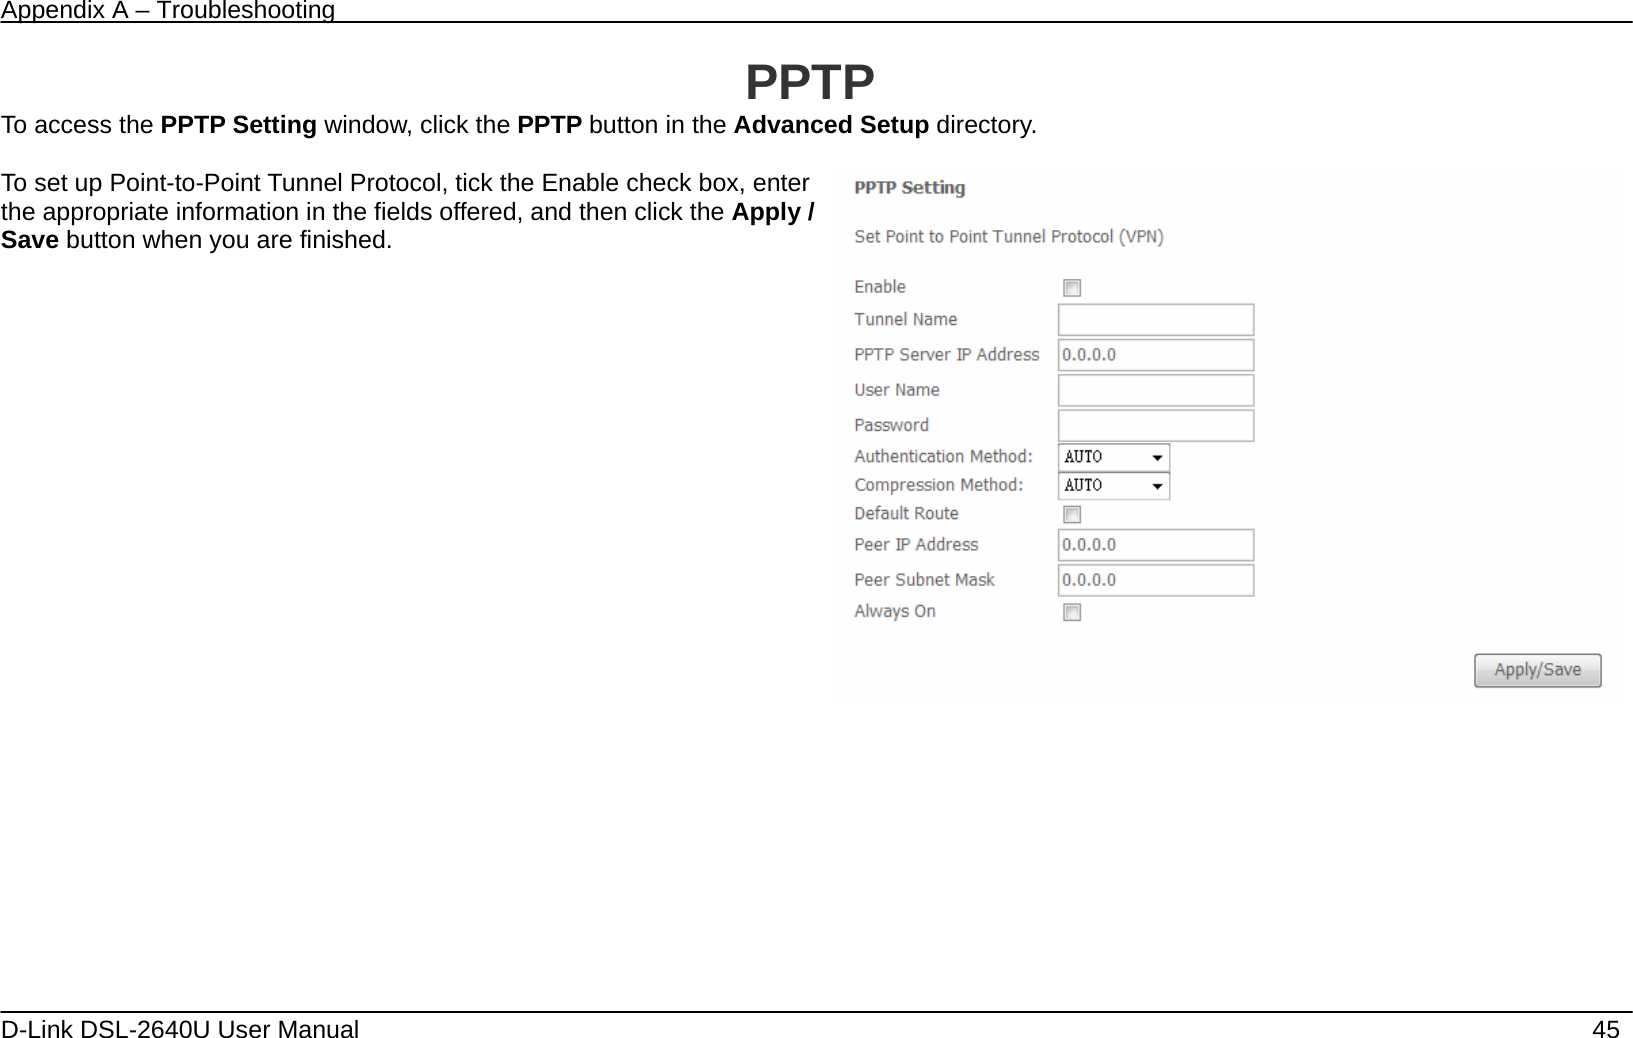 Appendix A – Troubleshooting   D-Link DSL-2640U User Manual    45 PPTP To access the PPTP Setting window, click the PPTP button in the Advanced Setup directory.  To set up Point-to-Point Tunnel Protocol, tick the Enable check box, enter the appropriate information in the fields offered, and then click the Apply / Save button when you are finished.        